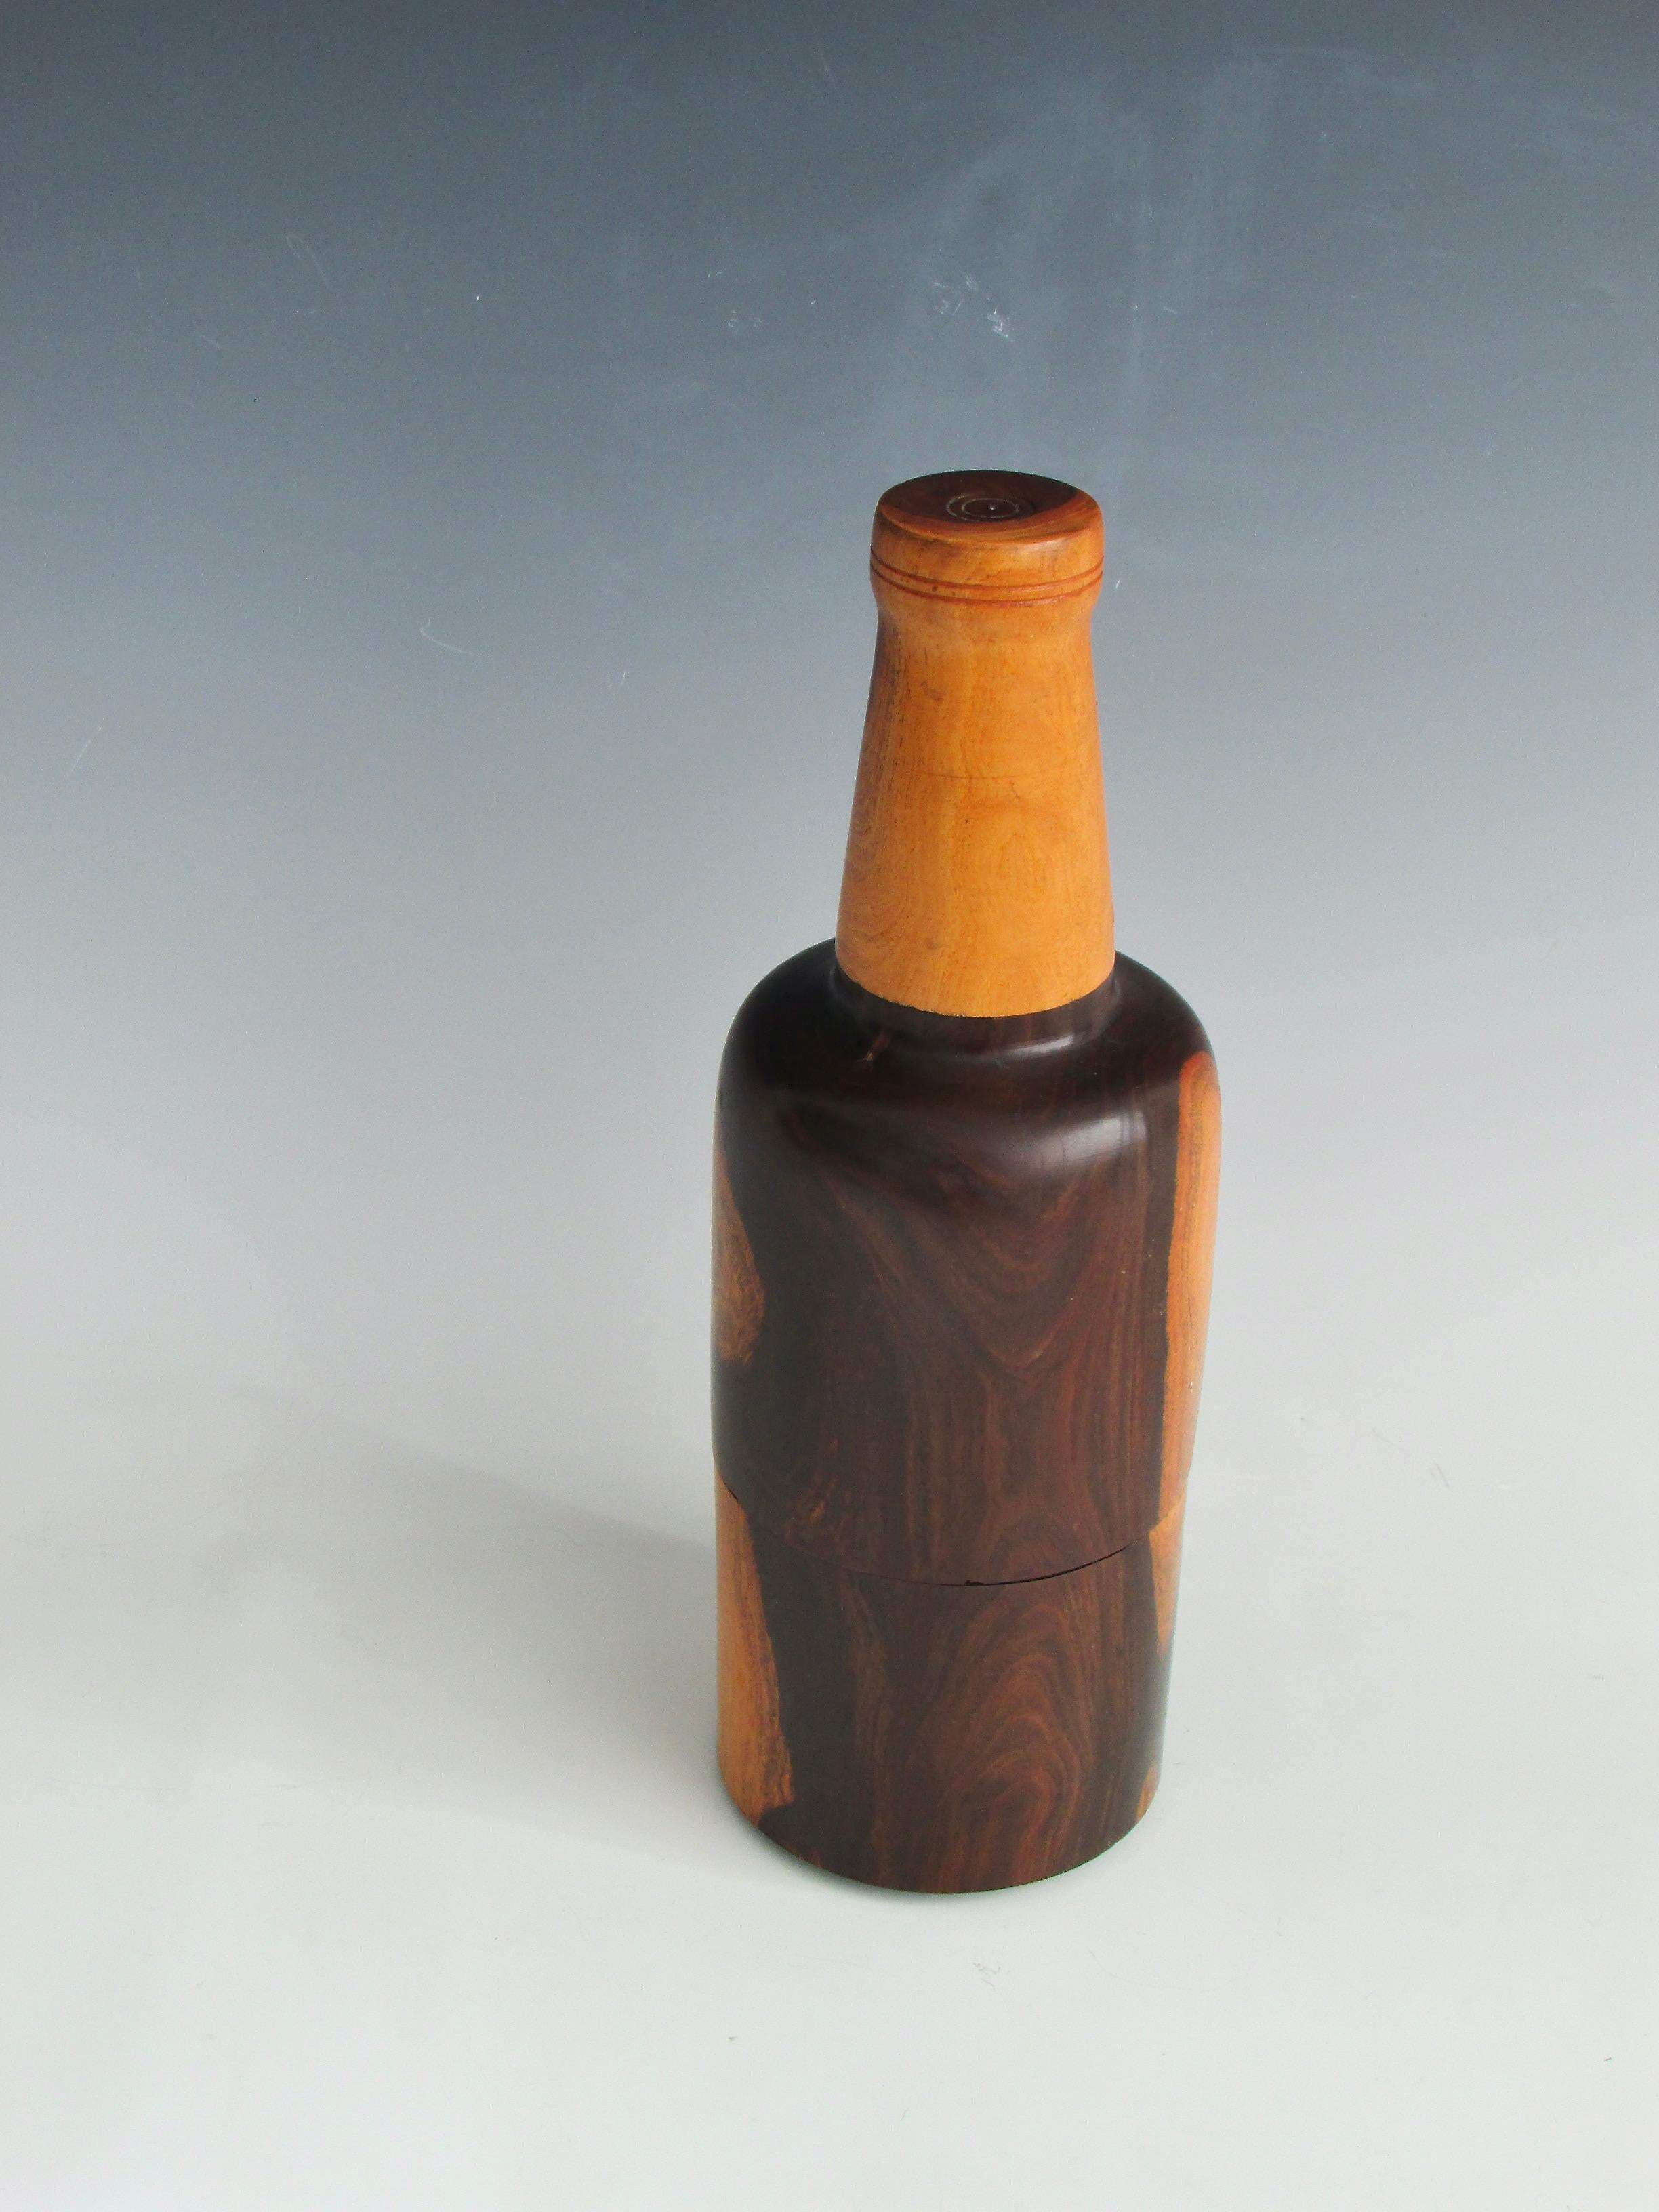 Fine example of wood turning. Three sections of turned rosewood put together to form a wine bottle. I believe this to be early 20th century.